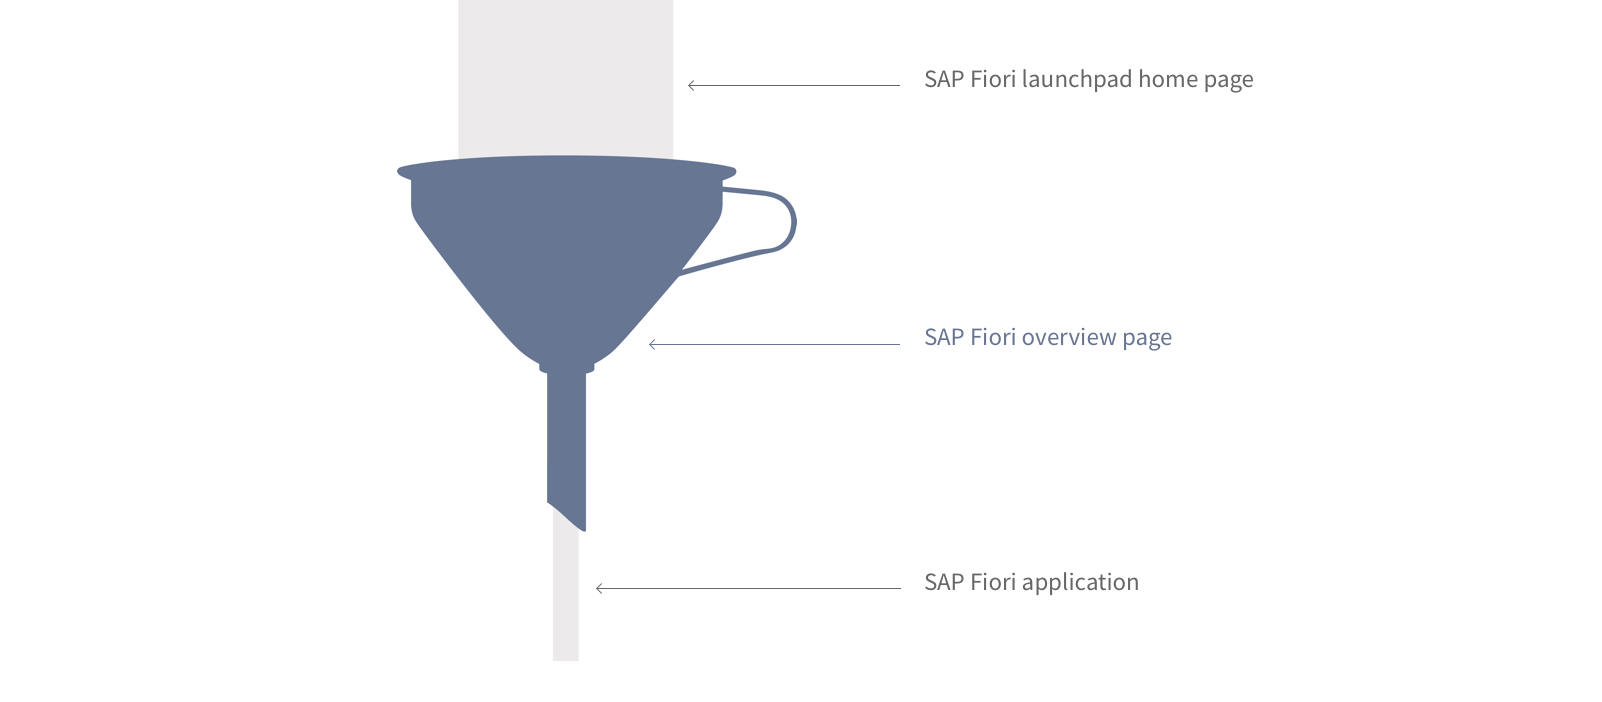 Different entry points in SAP Fiori